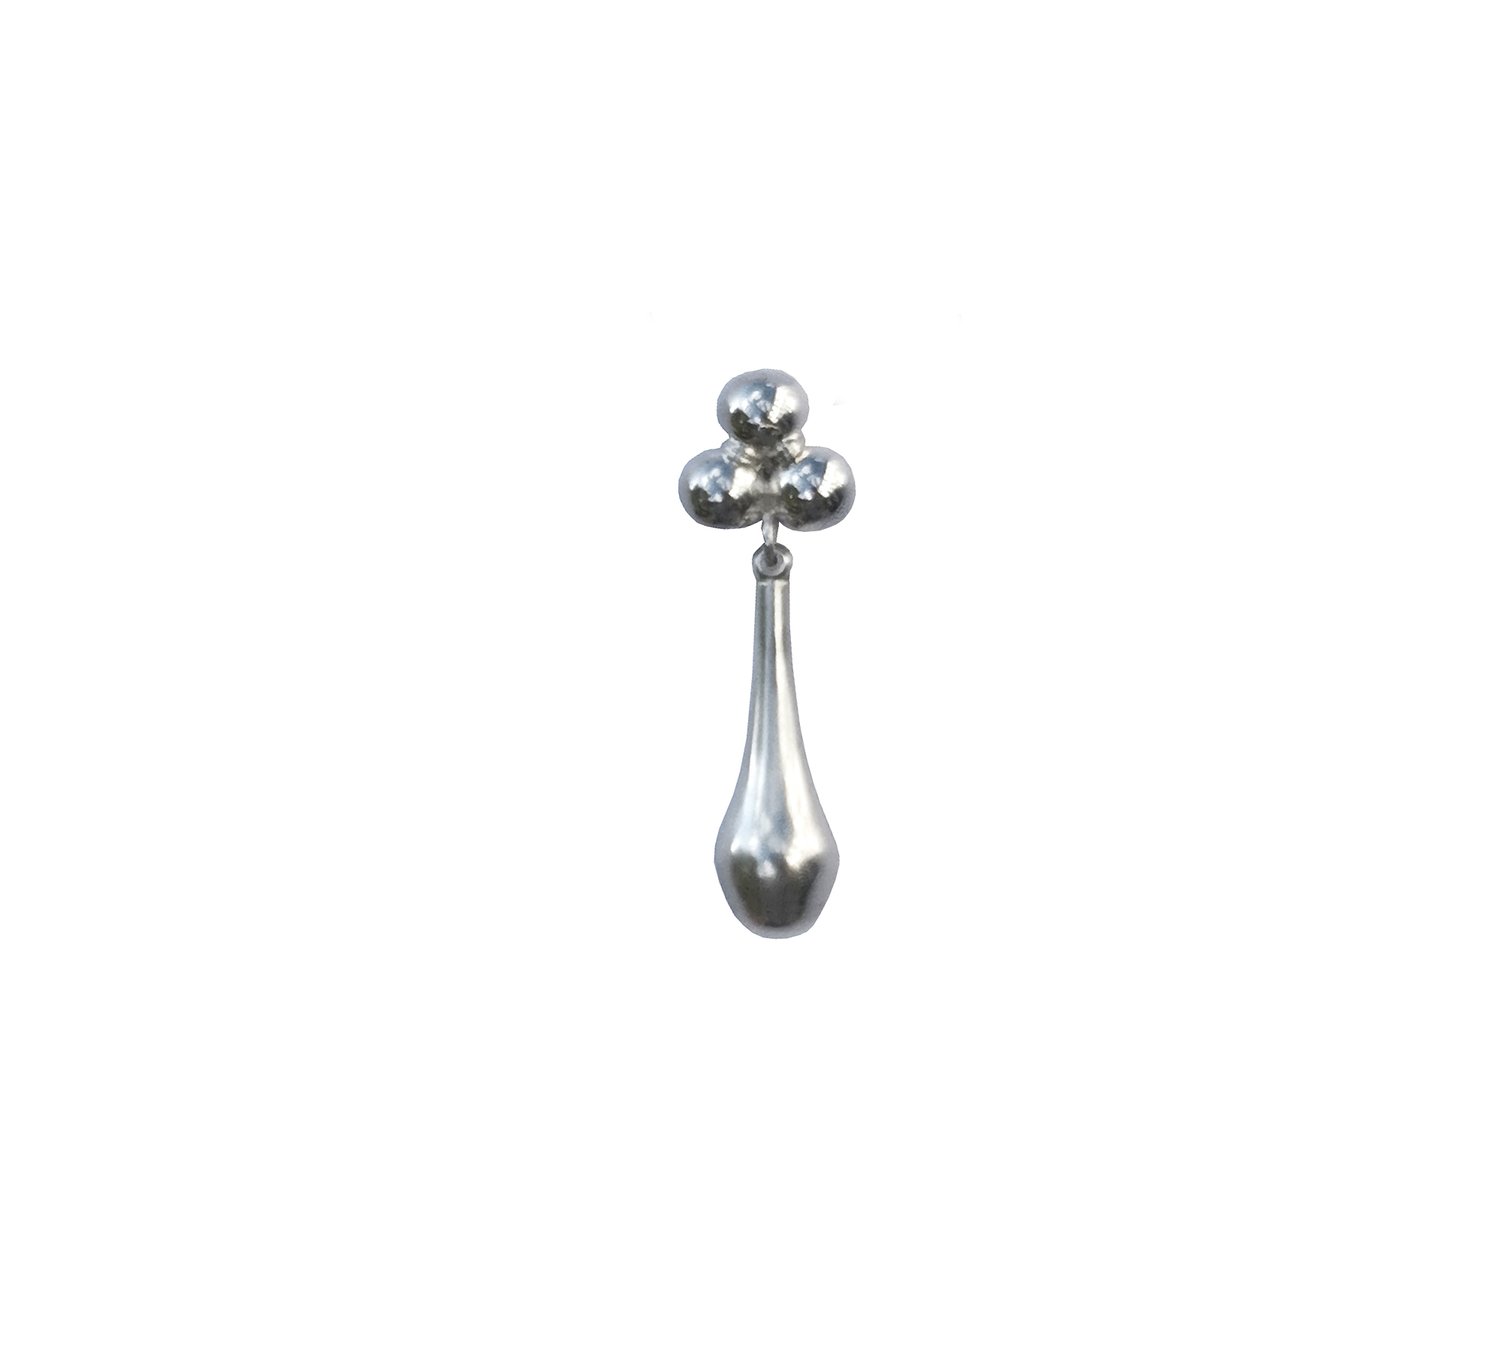 Image of Pendalogue earring silver